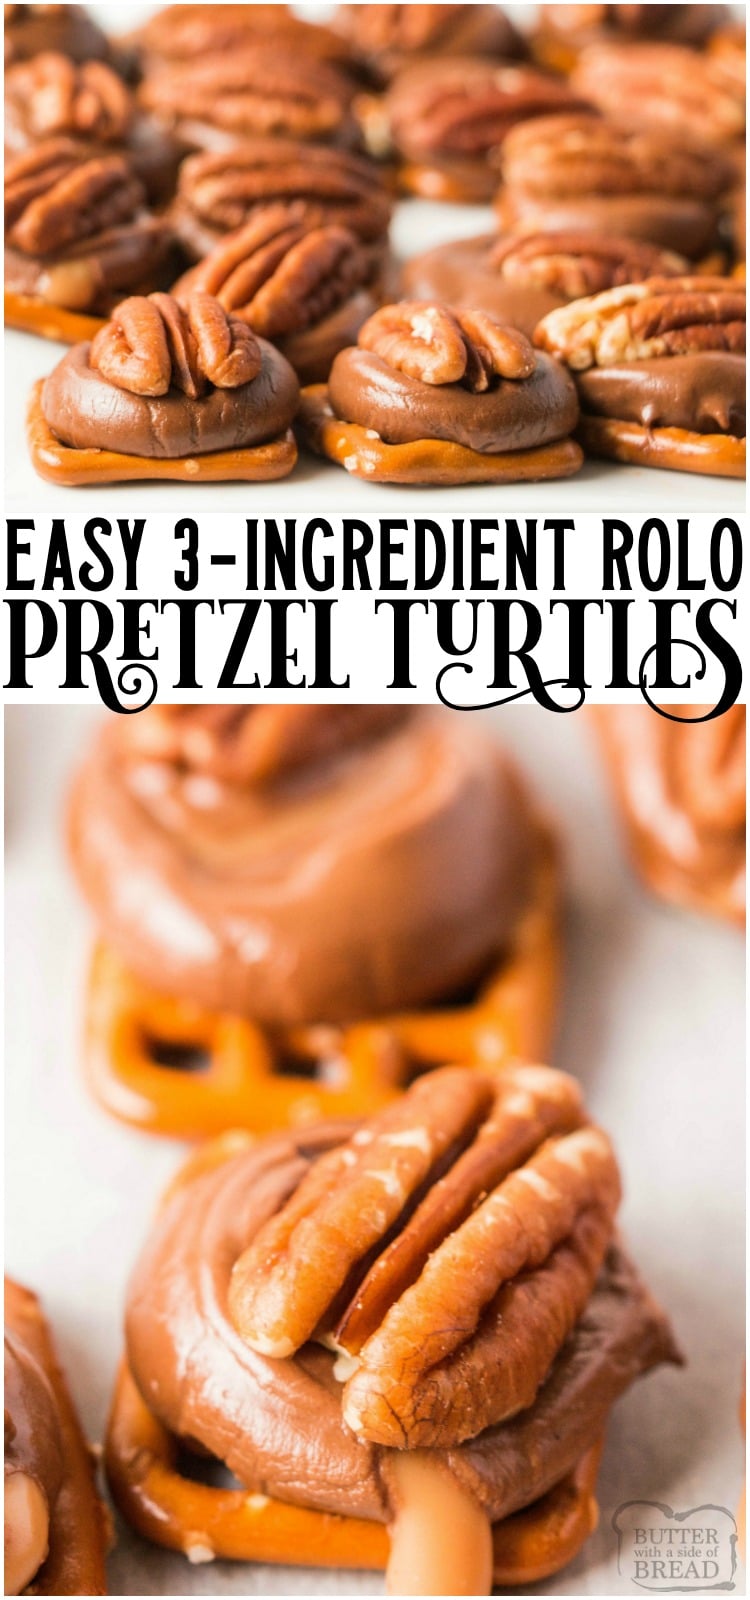 Rolo pretzel turtles are delicious salted caramel pretzel pecan bites that are made in minutes and are perfect holiday treats! #rolo #turtle #pretzels #candy #caramel #saltysweet #Christmascandy #dessert #recipe from BUTTER WITH A SIDE OF BREAD